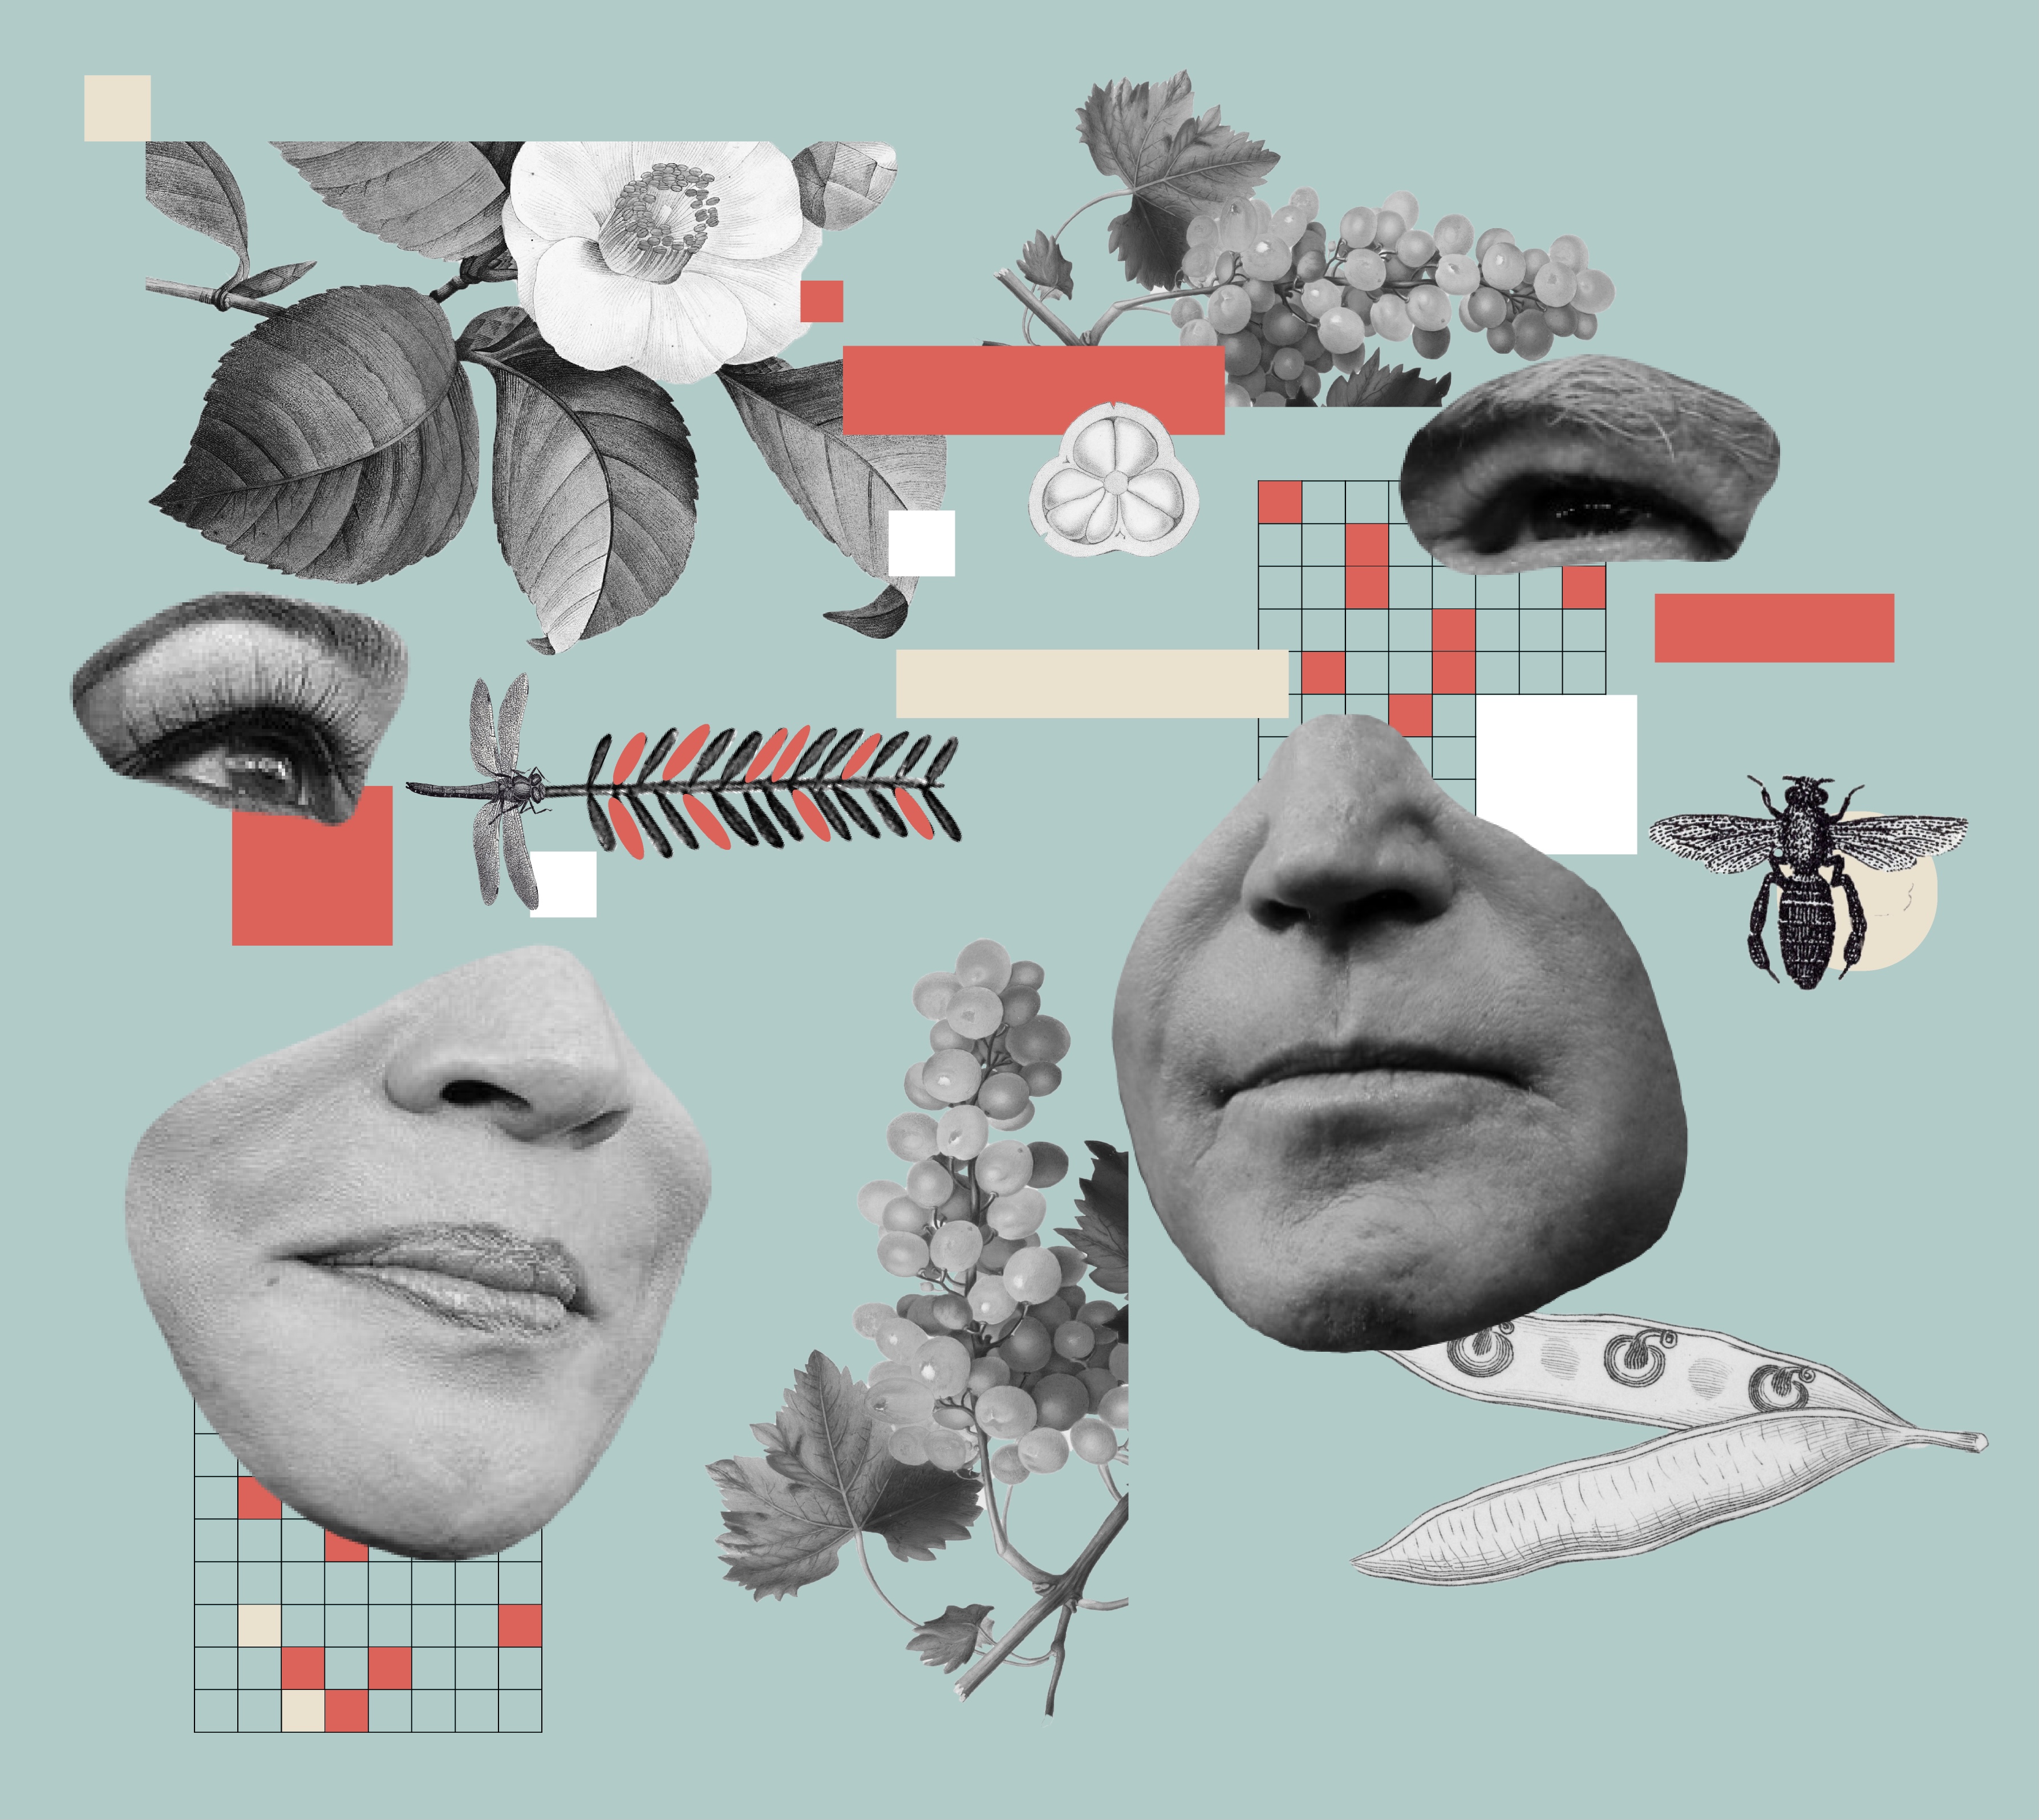 an artistic collage showing insects, plants, and the mouths of joe biden and kamala harris against a light blue background